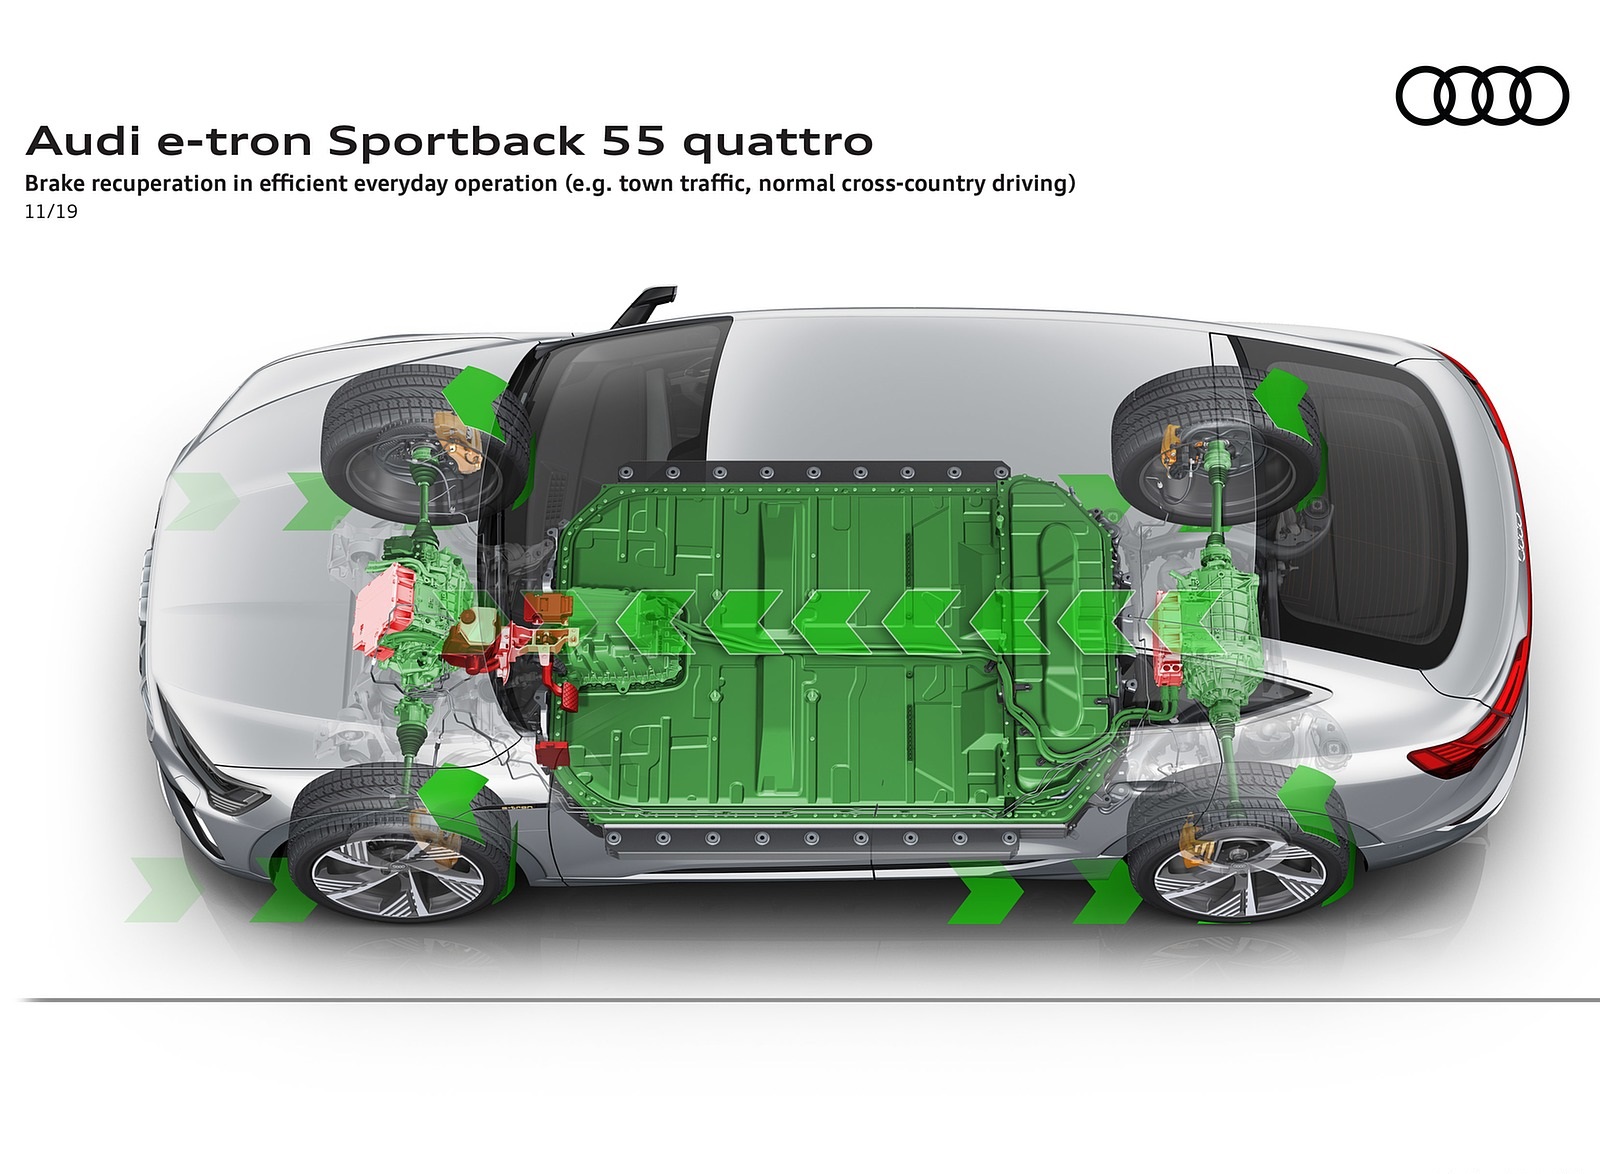 2020 Audi e-tron Sportback Brake recuperation in efficient everyday operation (e.g. town traffic normal cross-country driving) Wallpapers #115 of 145